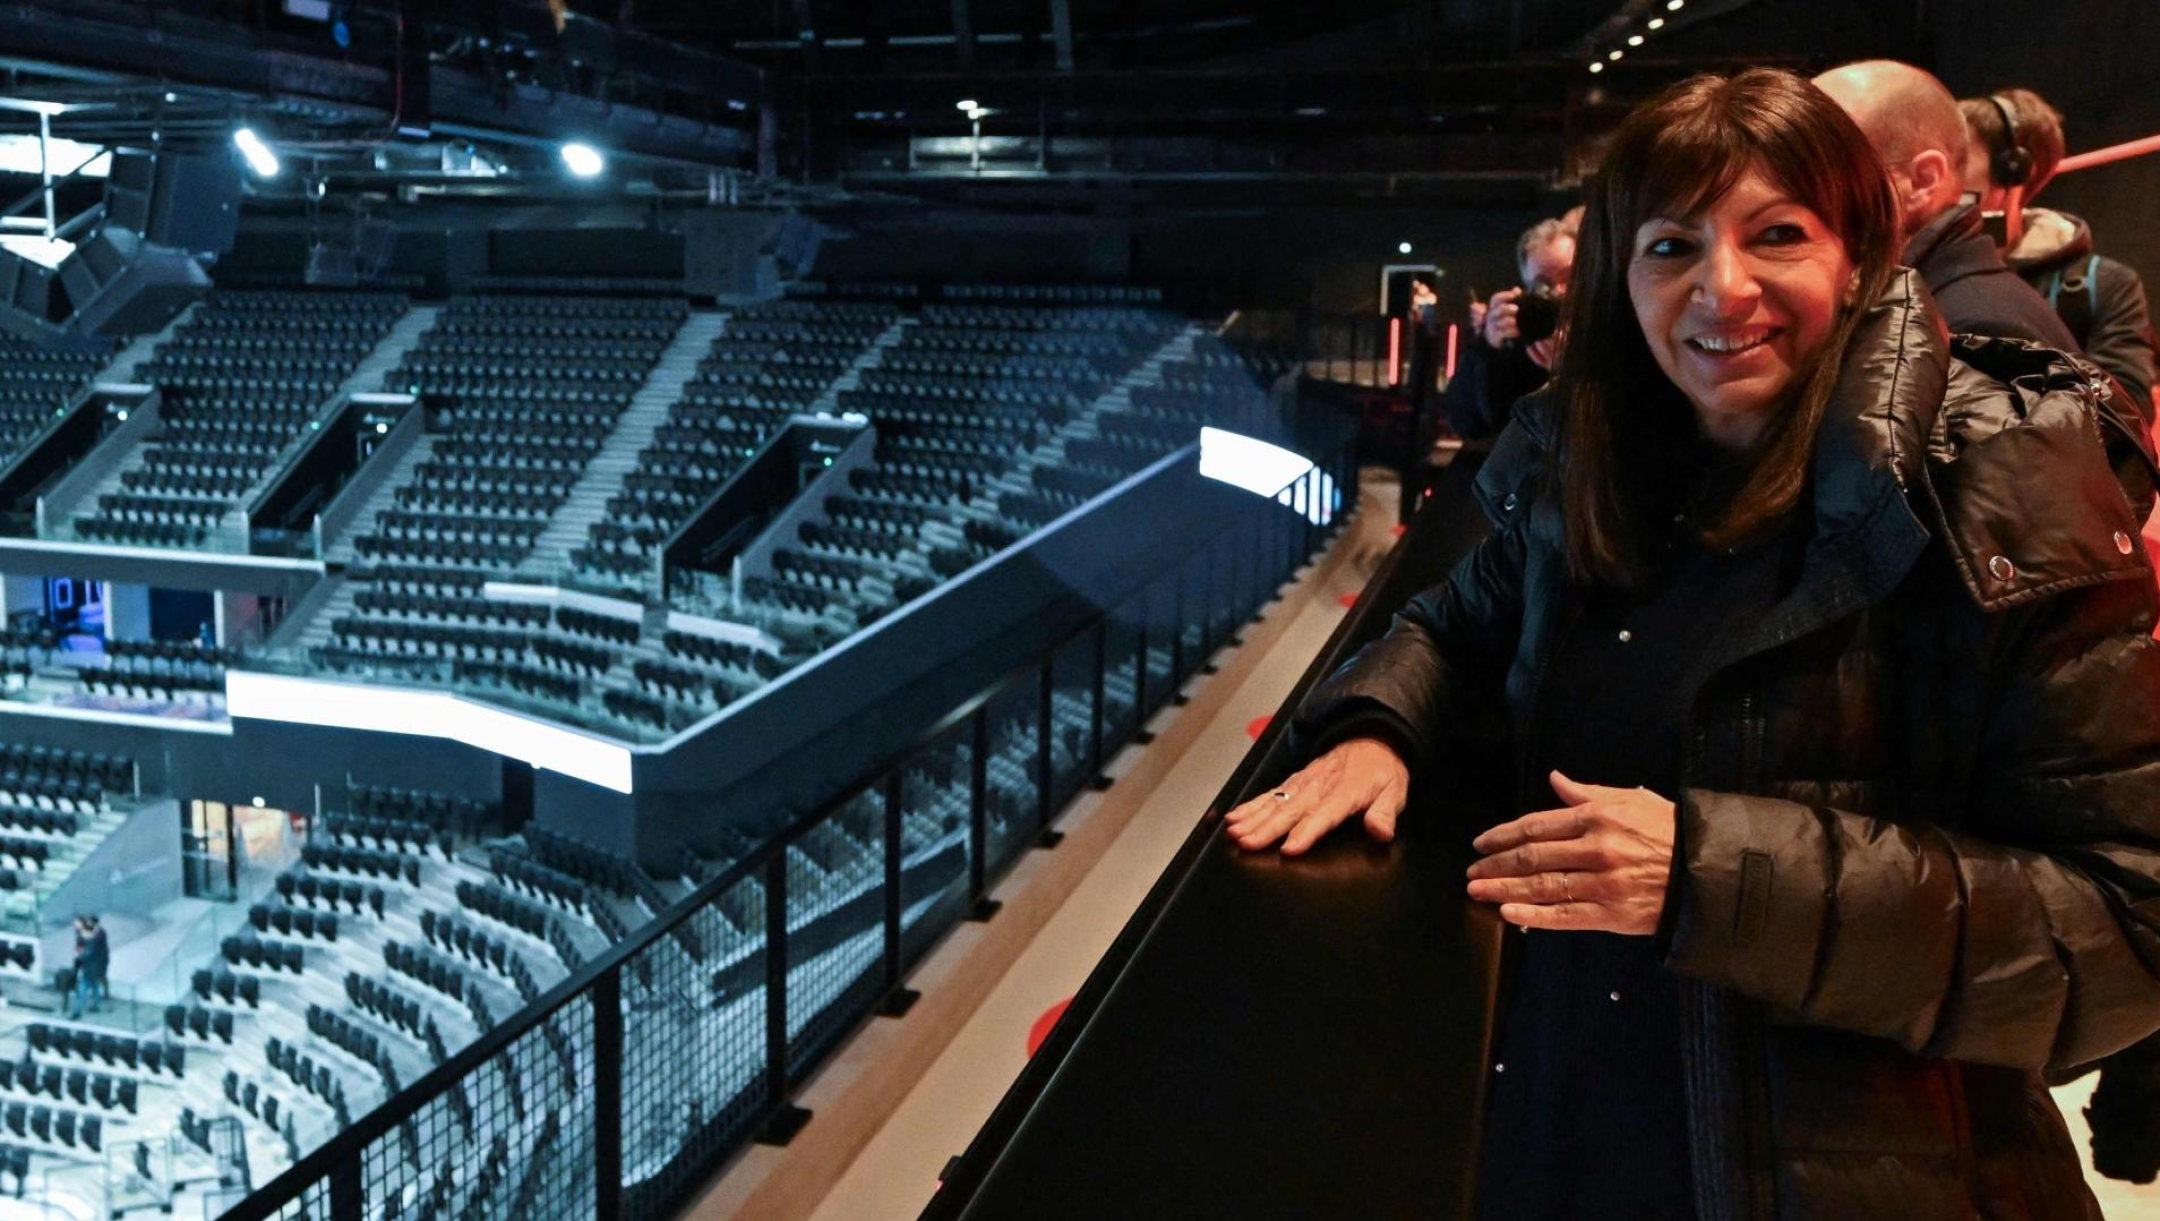 Mayor of Paris Anne Hidalgo looks on during the inauguration of the Arena Porte de La Chapelle in Paris on February 11, 2024. The only new sports venue built in inner Paris for the Olympics this year, which will be used for gymnastics and badminton, opens its doors on February 11, 2024 in an area of the capital hoping to shed its reputation for crack-dealing and crime. The 8,000-seat Arena Porte de la Chapelle, which sits just inside the capital's ring road, is a key part of regeneration efforts centred on one of Paris's most deprived neighbourhoods. (Photo by Miguel MEDINA / POOL / AFP)